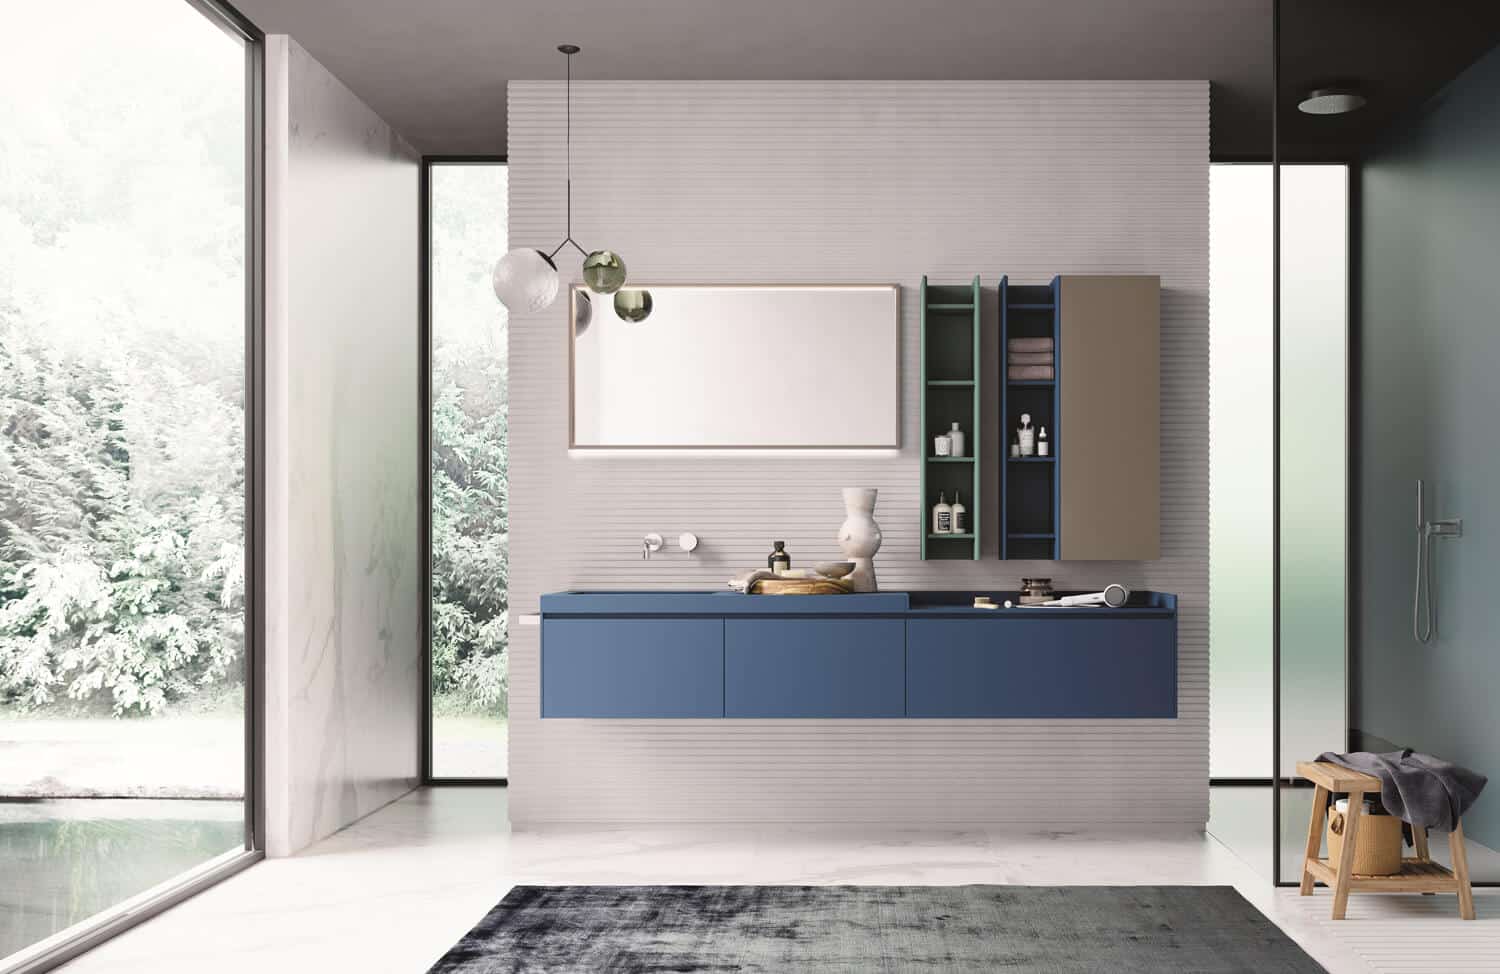 A fun, relaxing color palette well suited for a modern bathroom: Blu Oltremare, Verderame, and Tortora matte lacquers. 